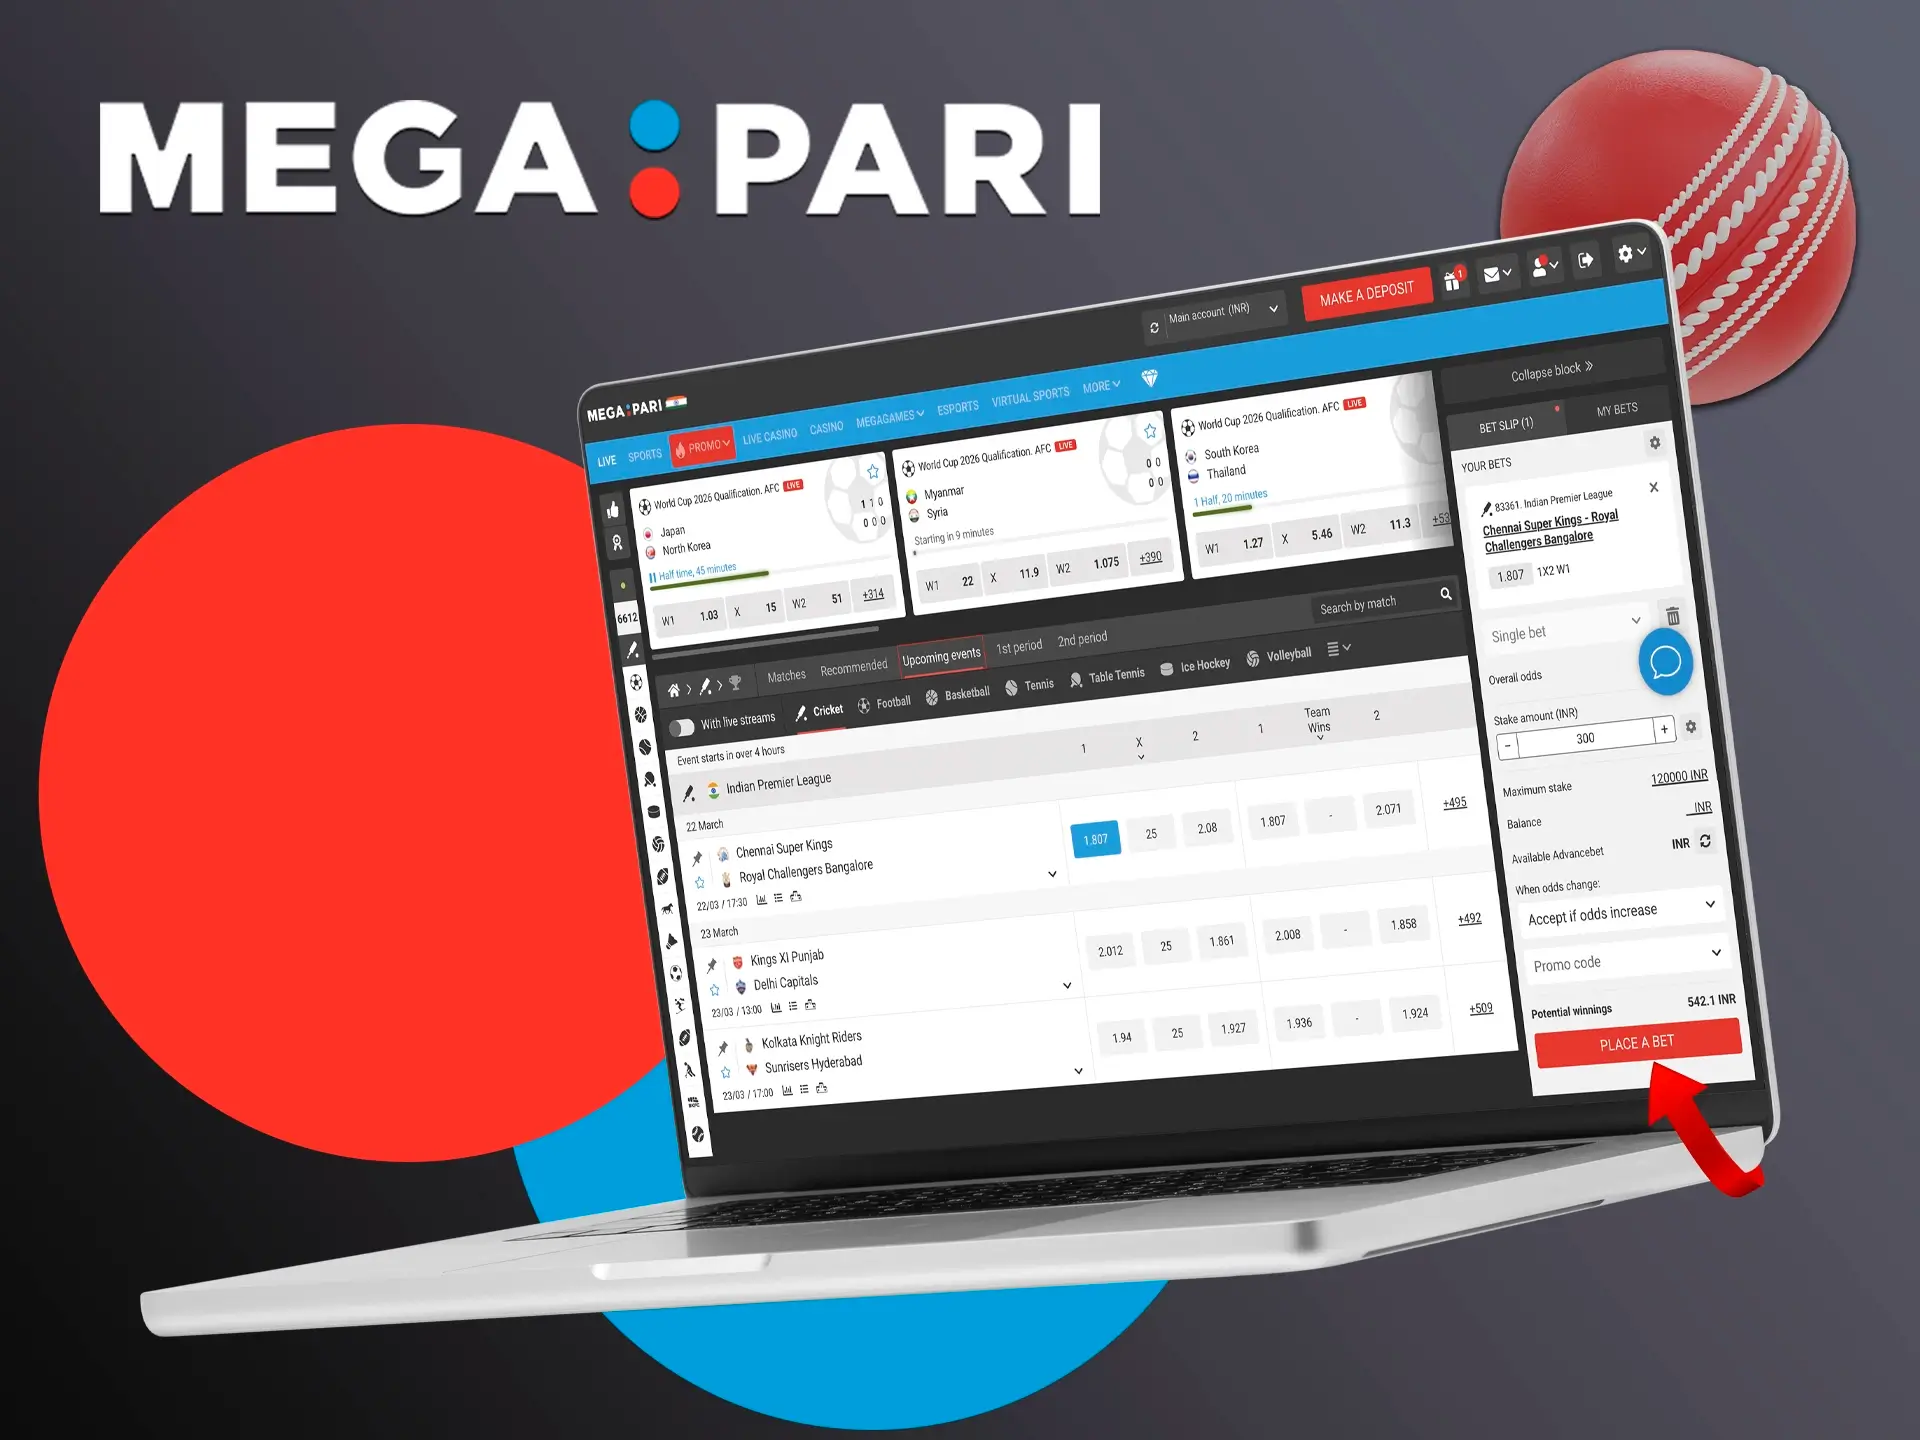 Complete your registration to get full access to Megapari Casino betting.